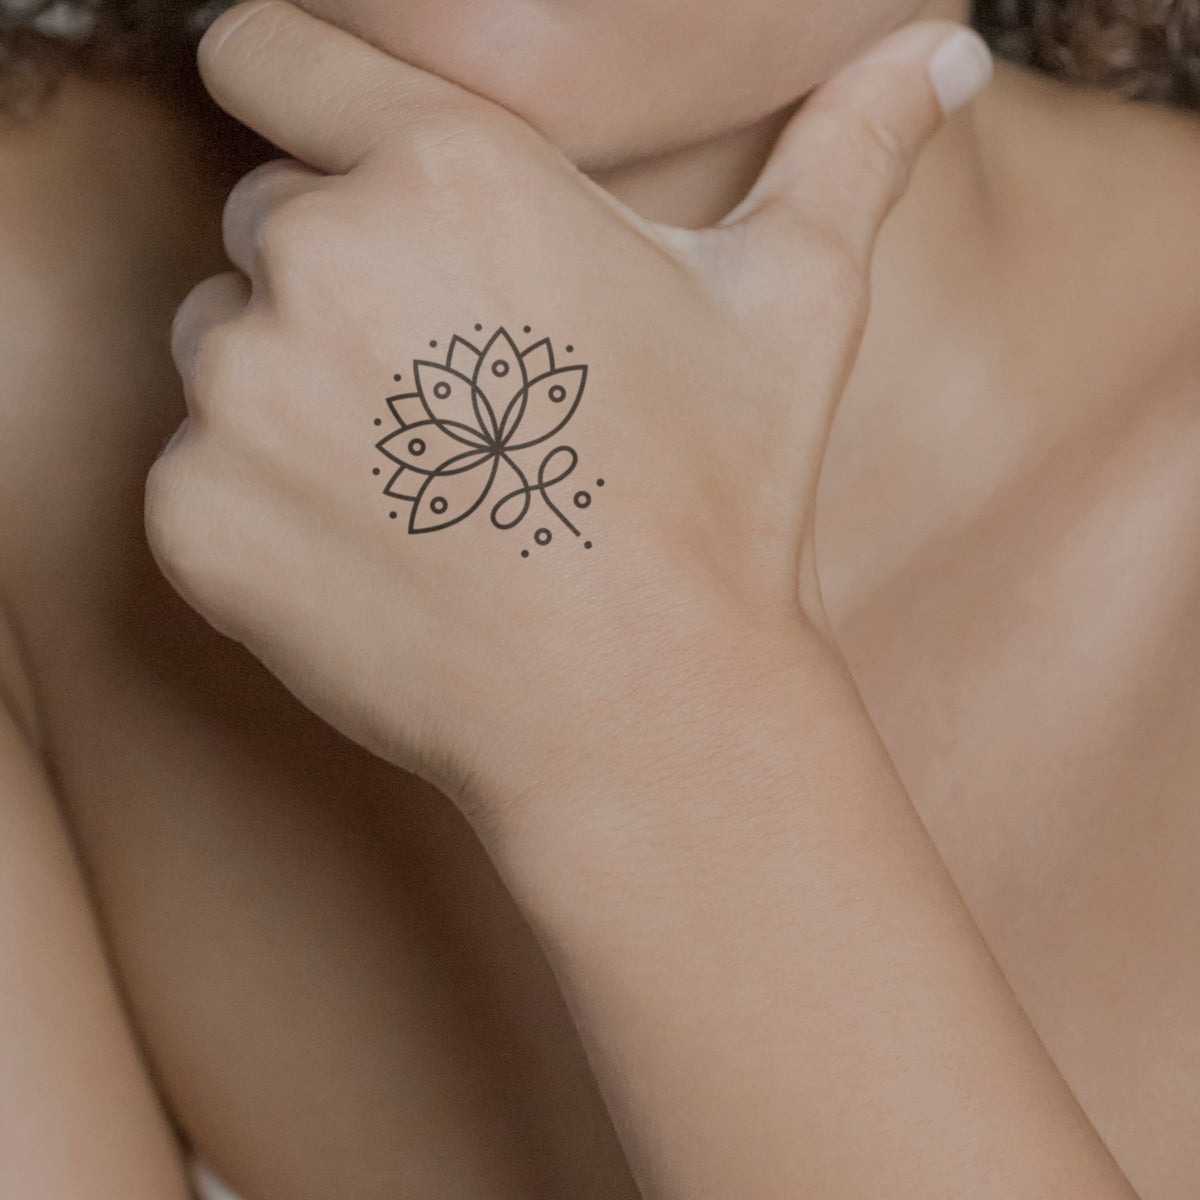 Lotus flower temporary tattoo located on the inner